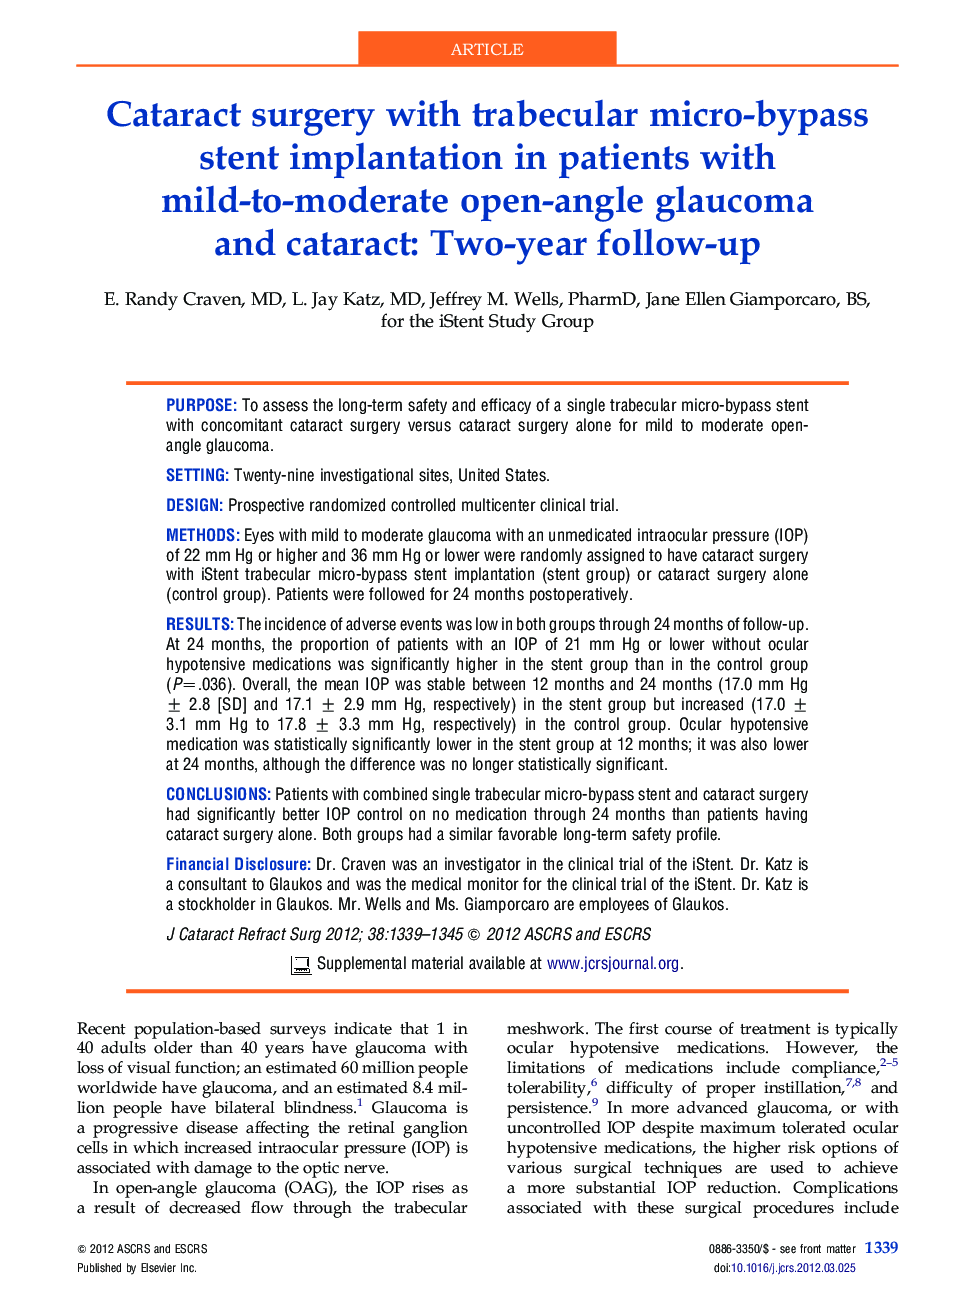 Cataract surgery with trabecular micro-bypass stent implantation in patients with mild-to-moderate open-angle glaucoma and cataract: Two-year follow-up